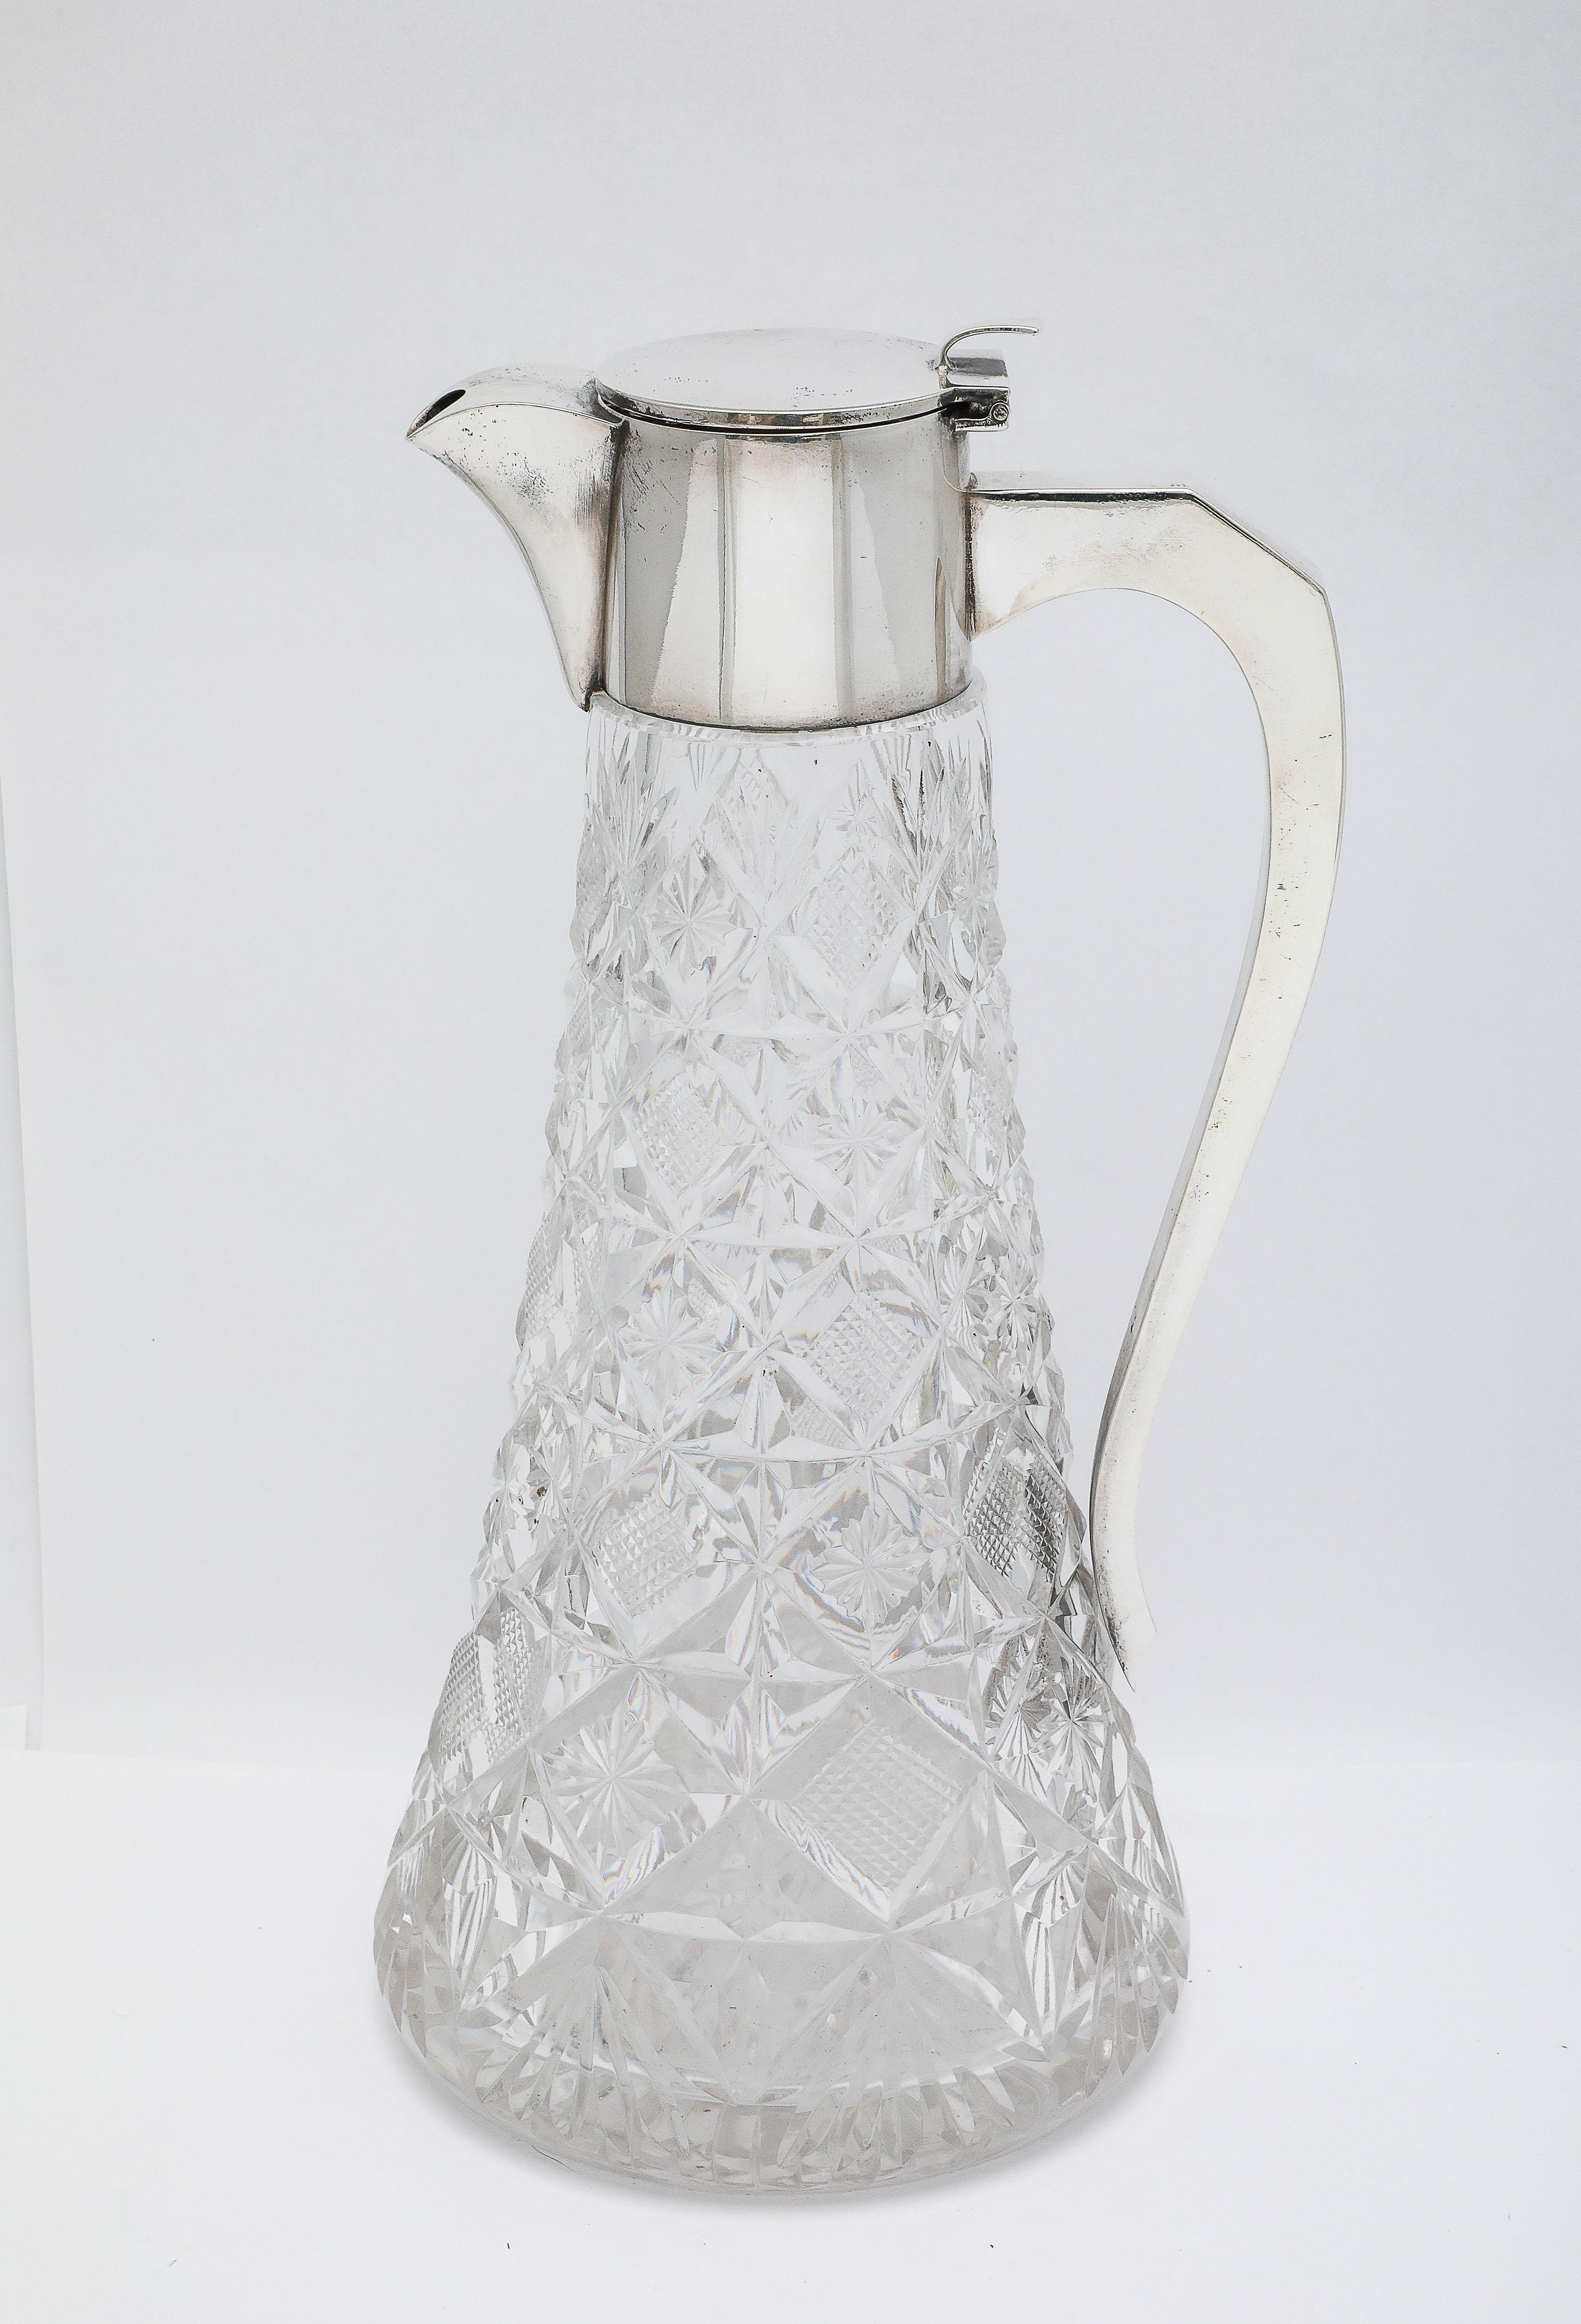 English Large Edwardian Period Sterling Silver-Mounted Claret Jug For Sale